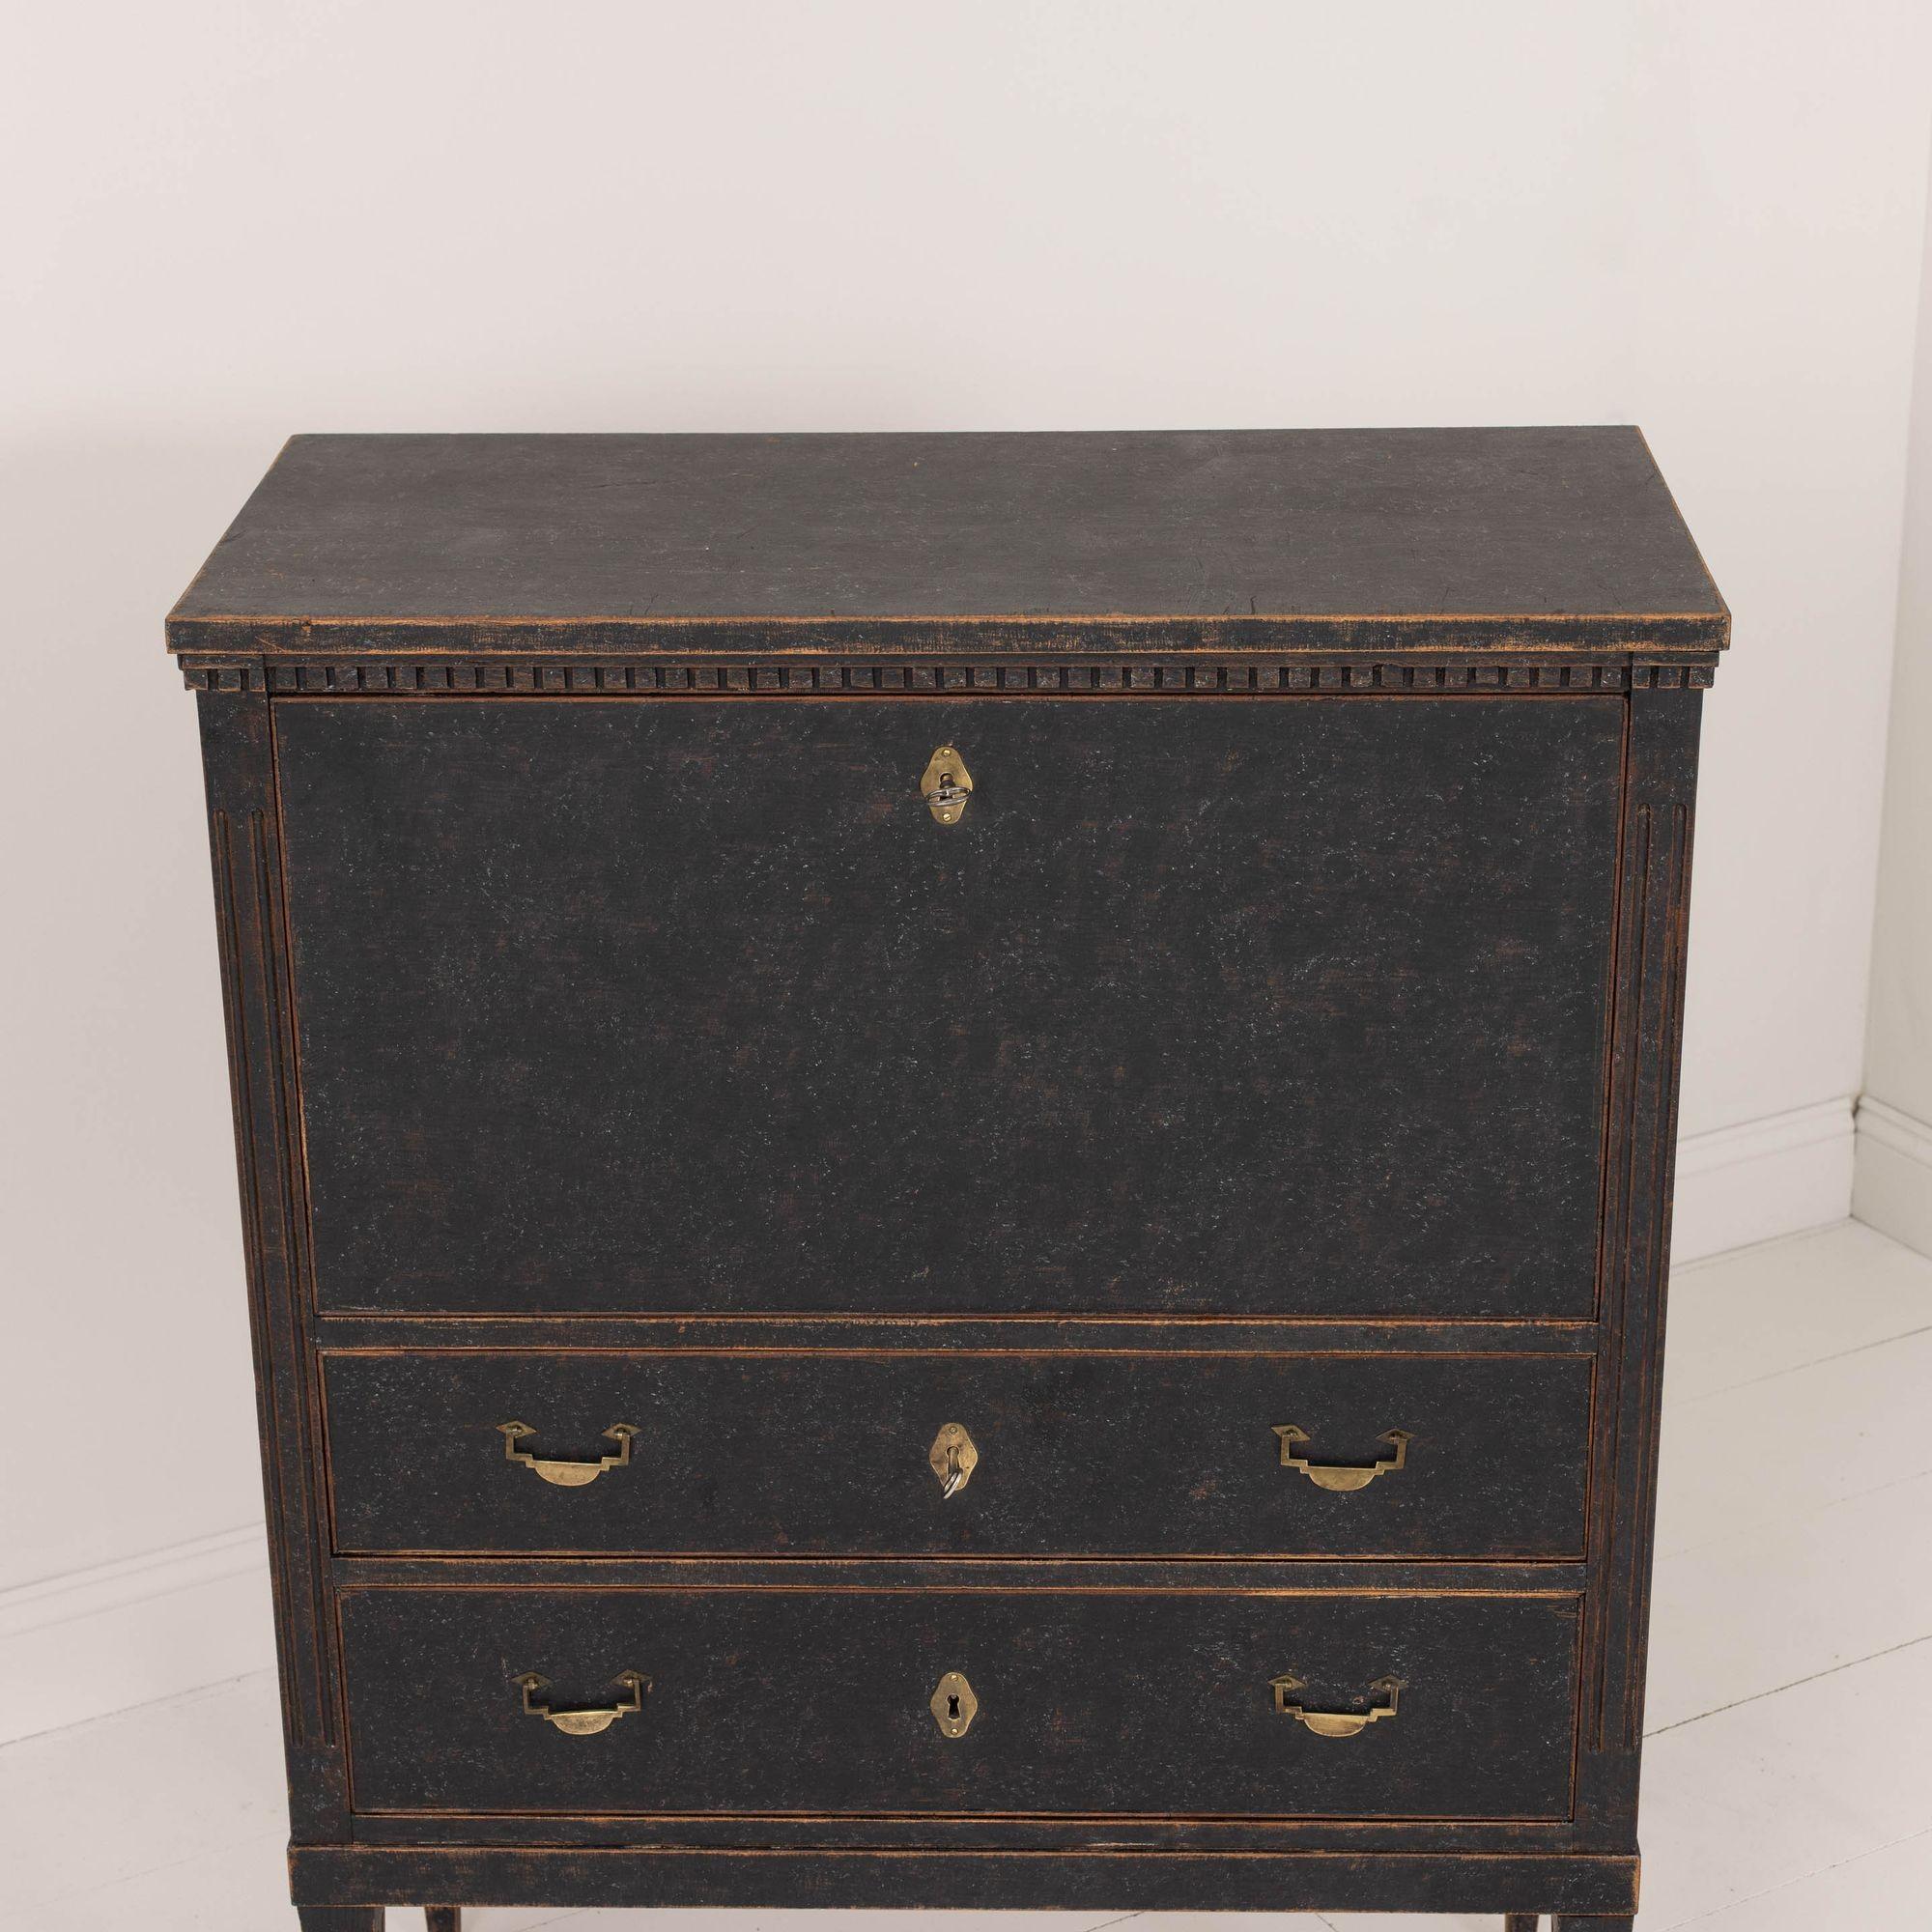 18th c. Swedish Gustavian Period Painted Fall Front Desk For Sale 7